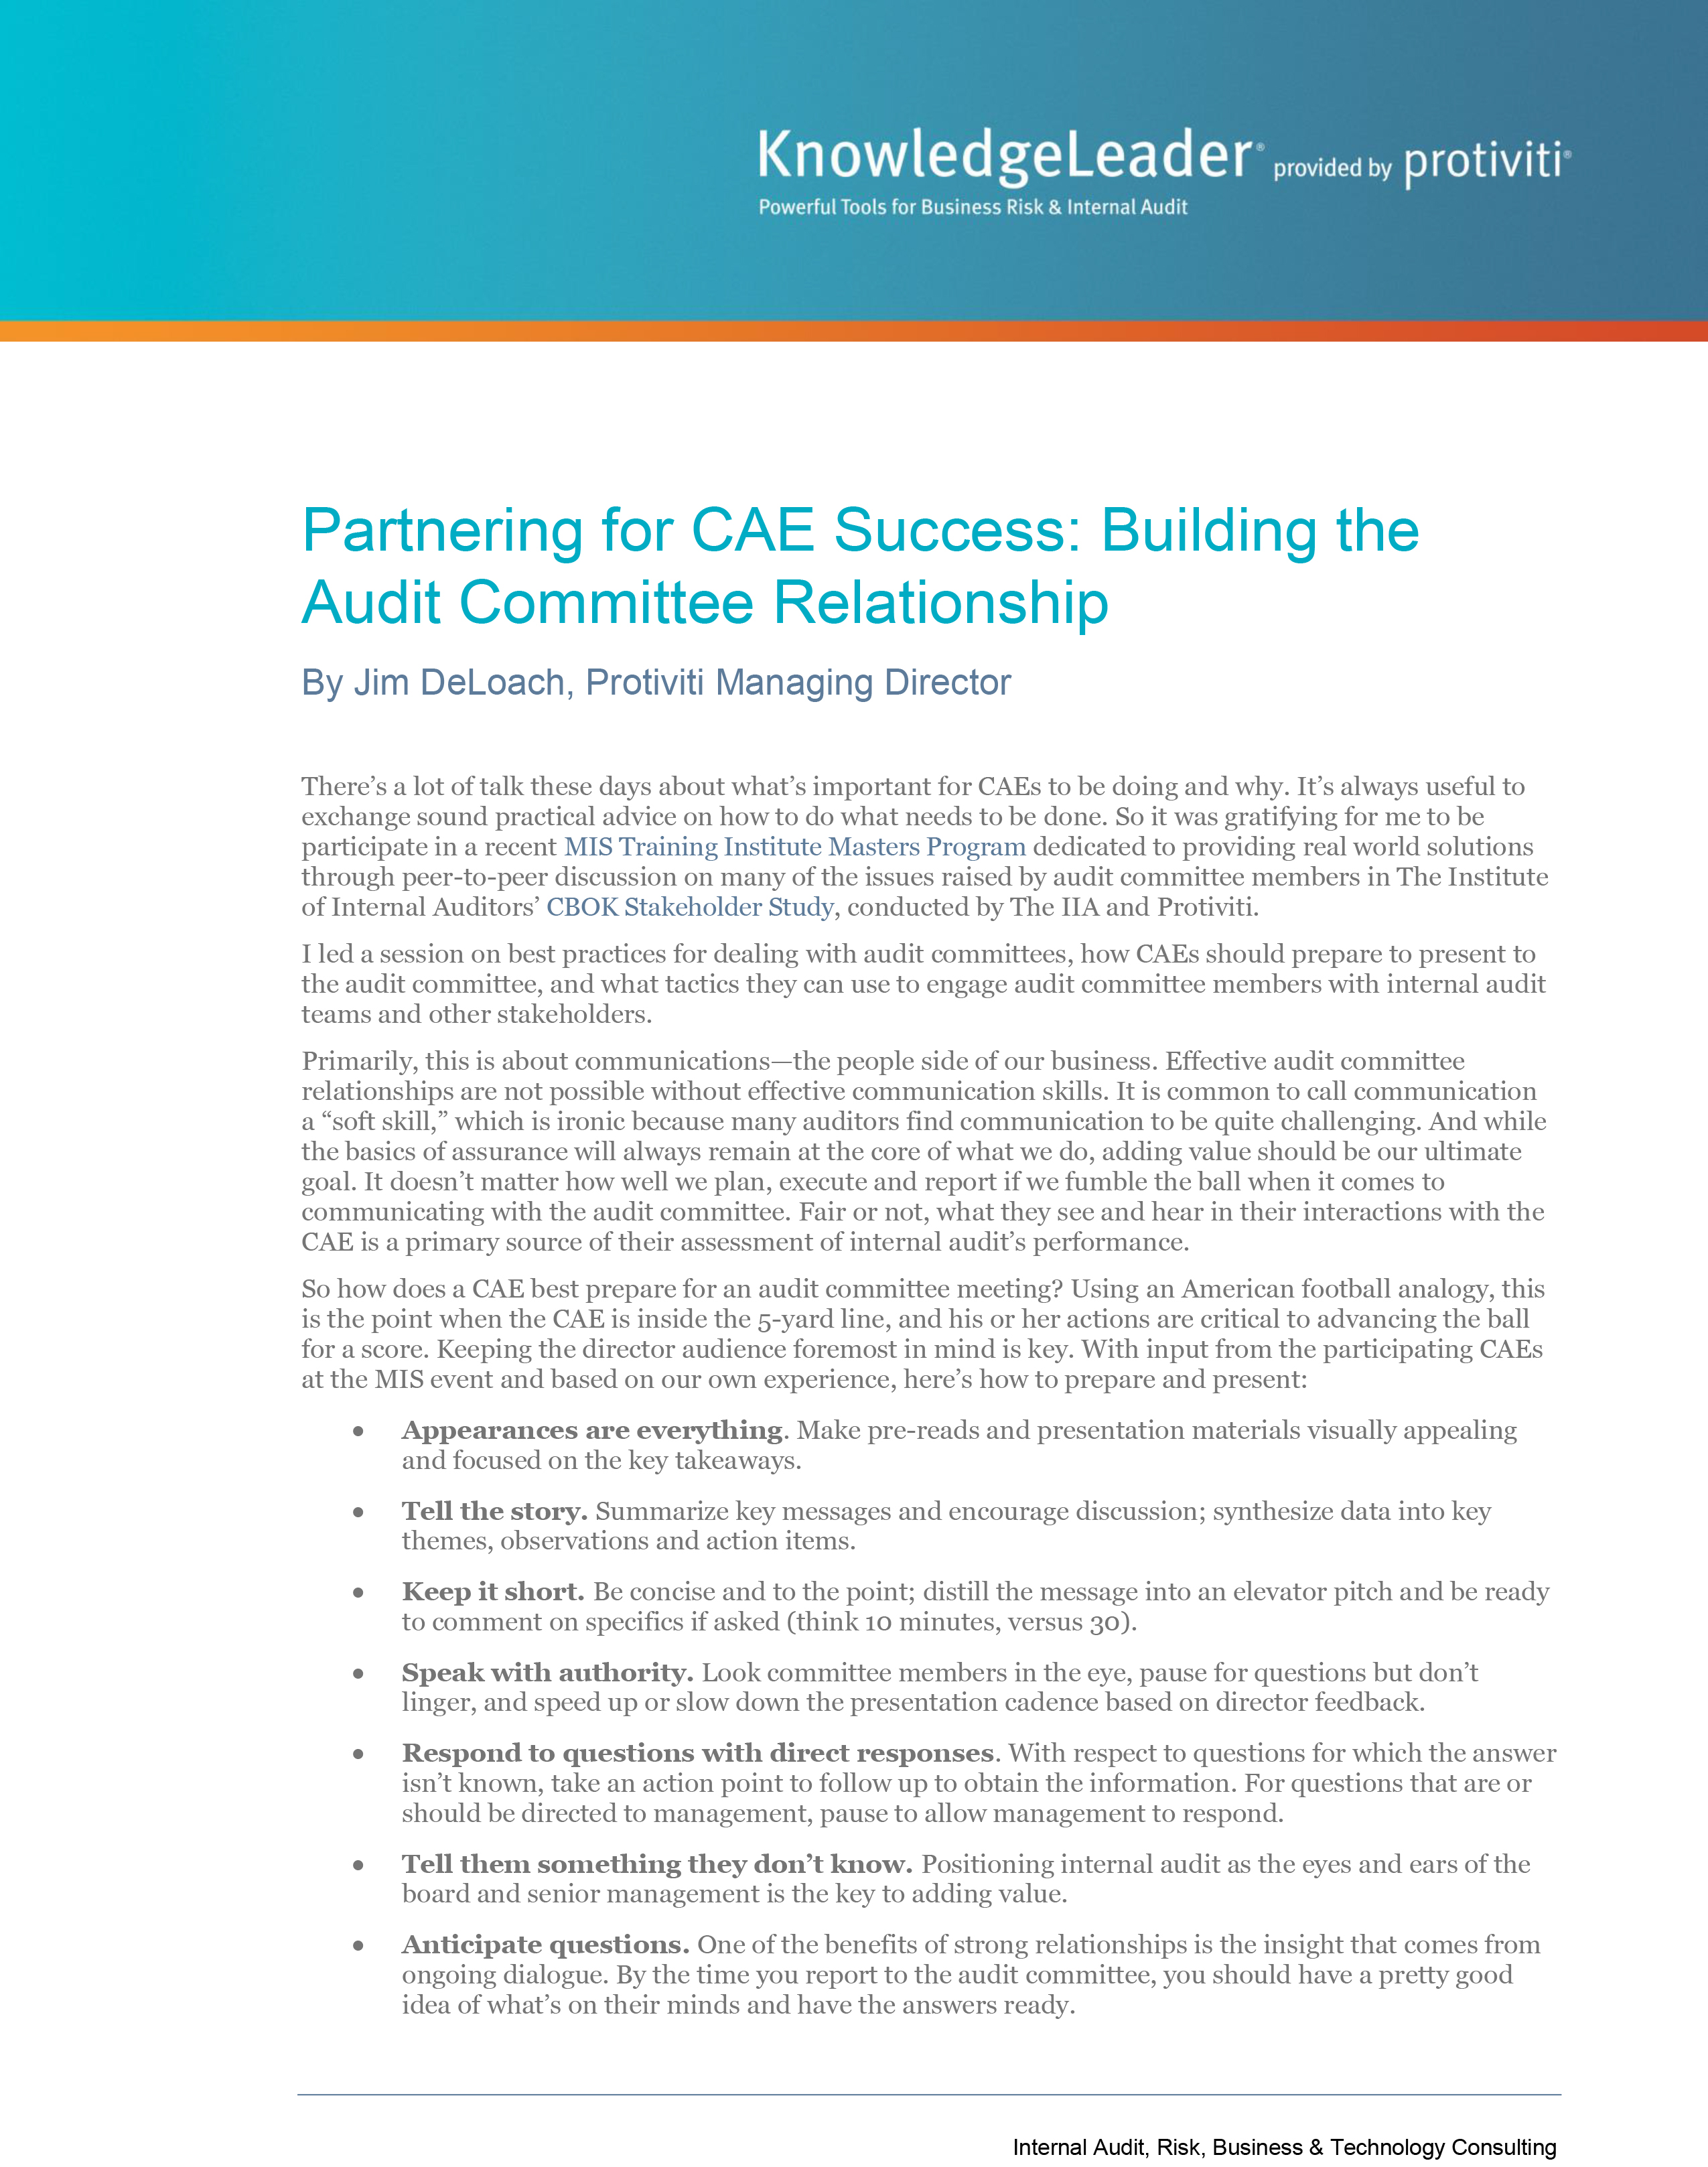 Screenshot of the first page of Partnering for CAE Success-Building the Audit Committee Relationship